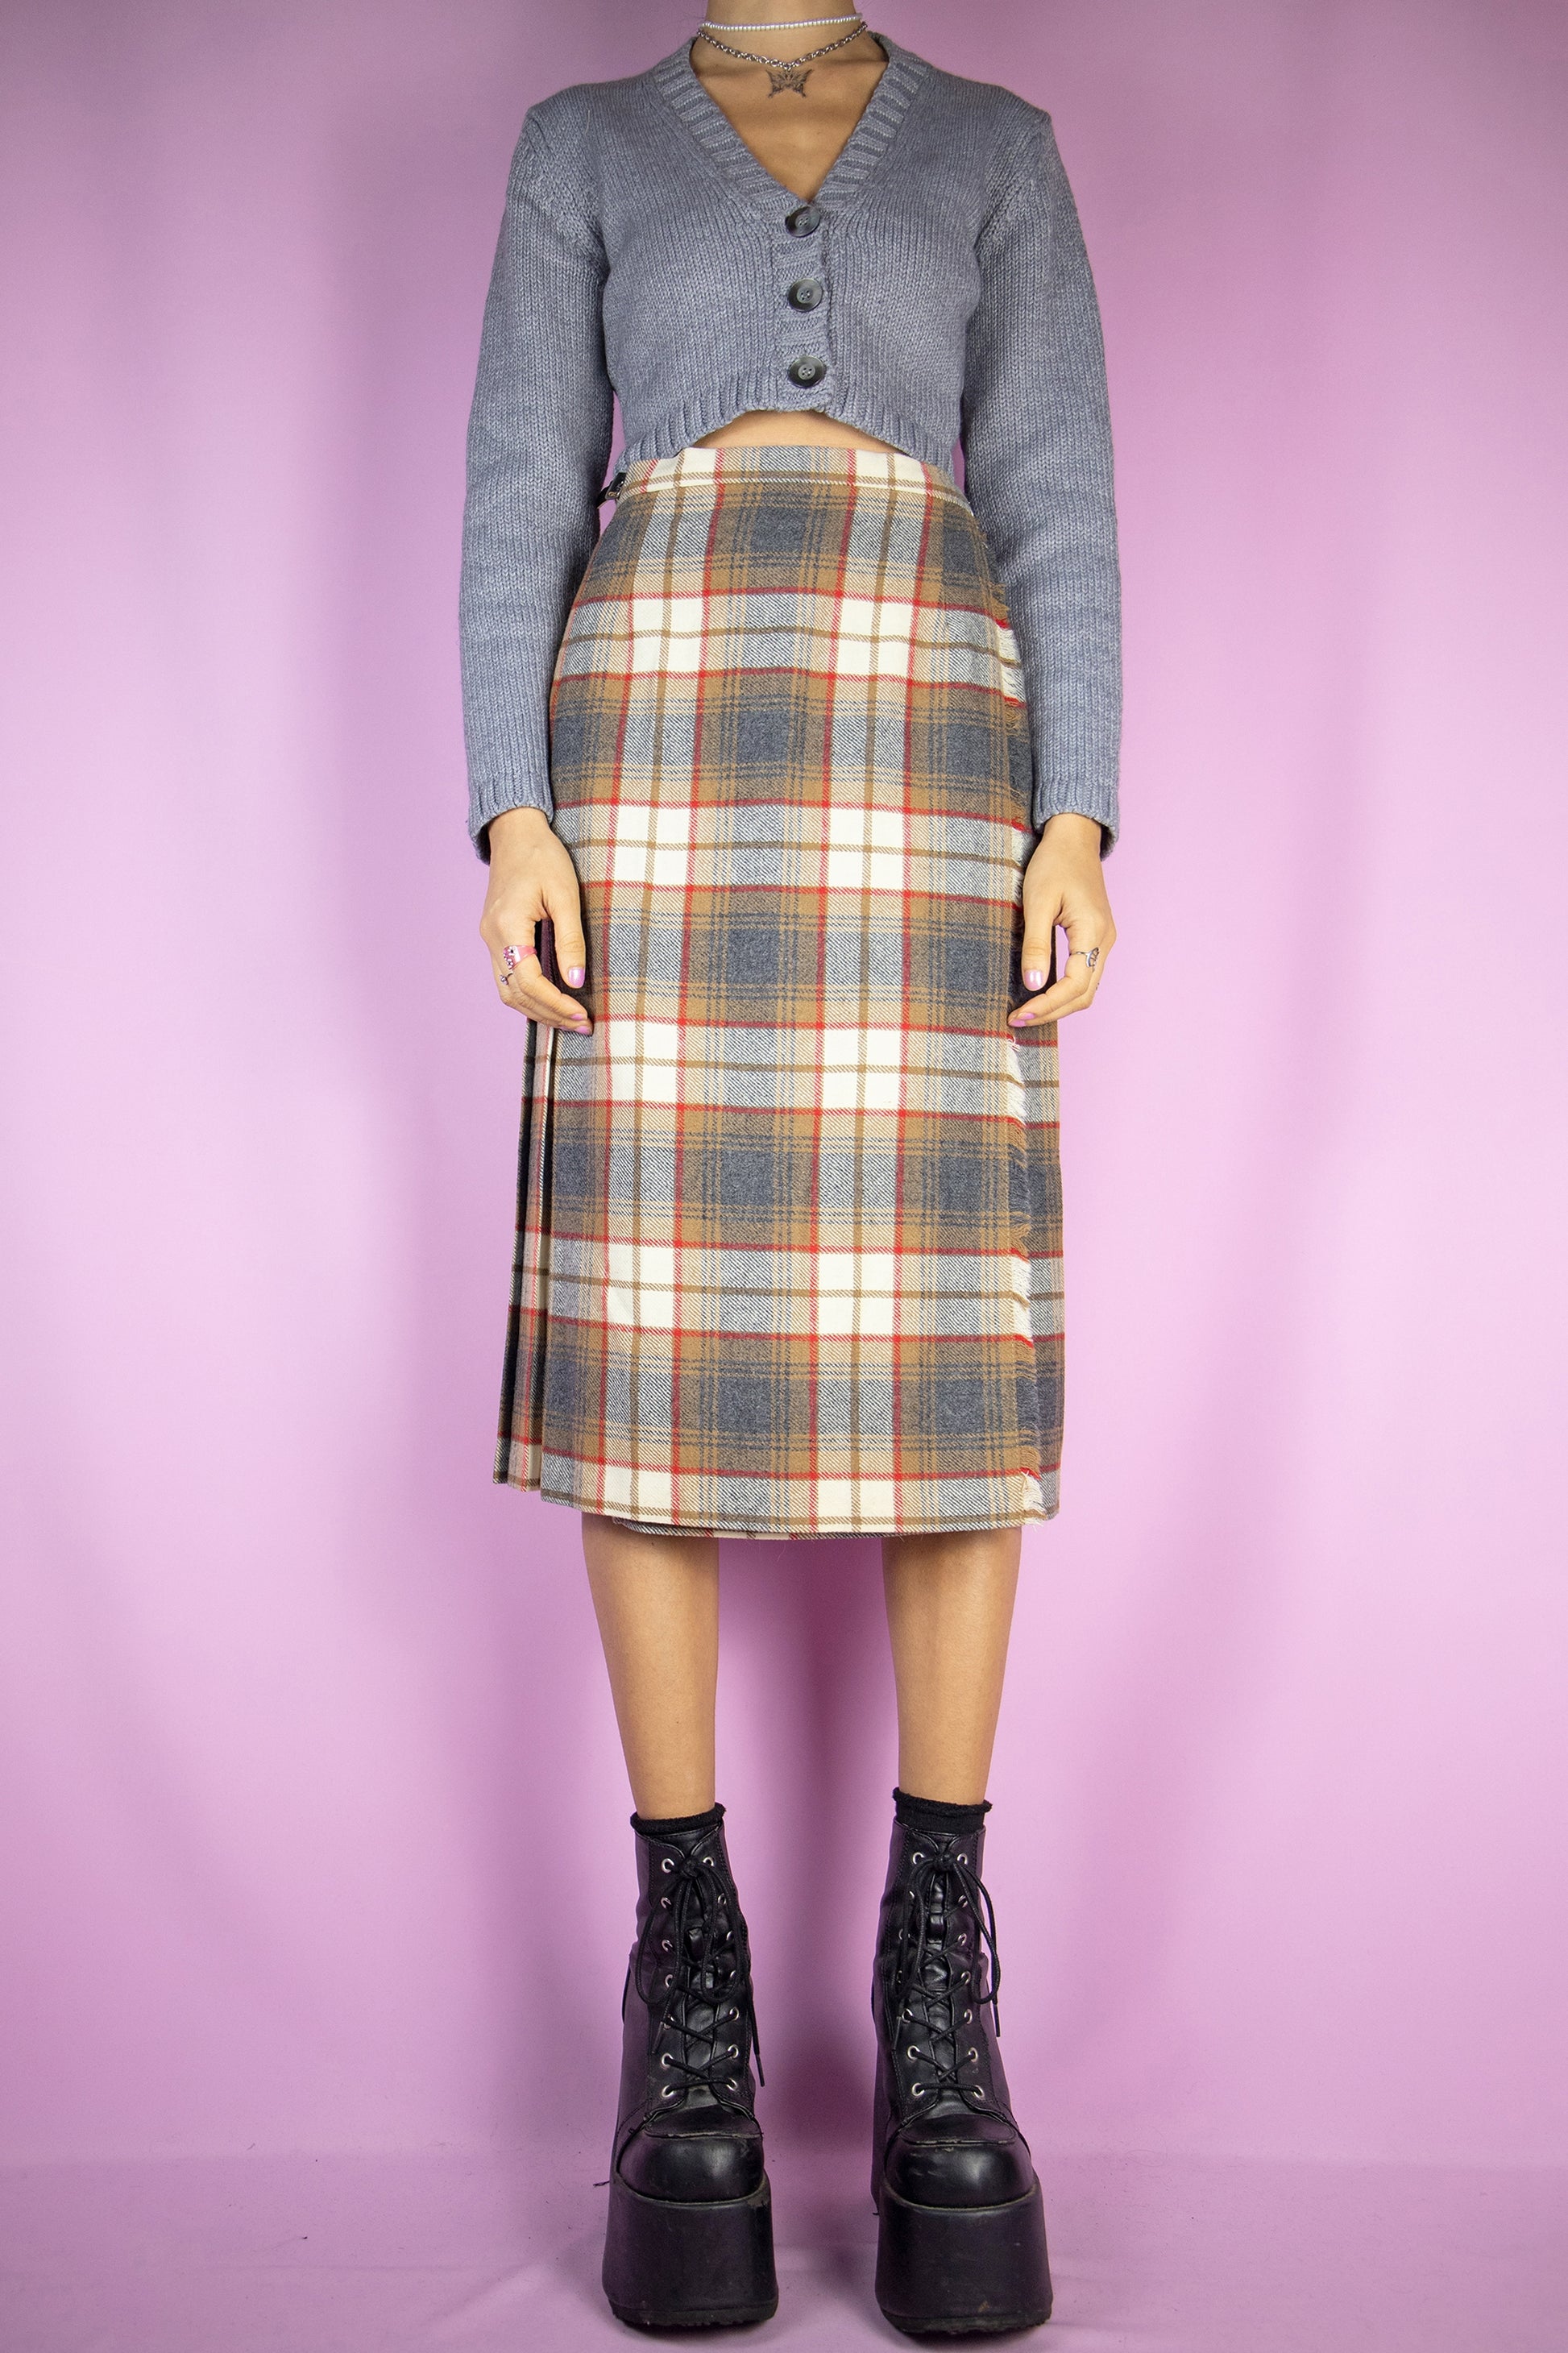 The Vintage 90s Wool Plaid Pleated Skirt is a brown multicolor check pleated wrap midi skirt with buckle closure made of virgin wool. Classic preppy tartan style 1990s winter skirt.